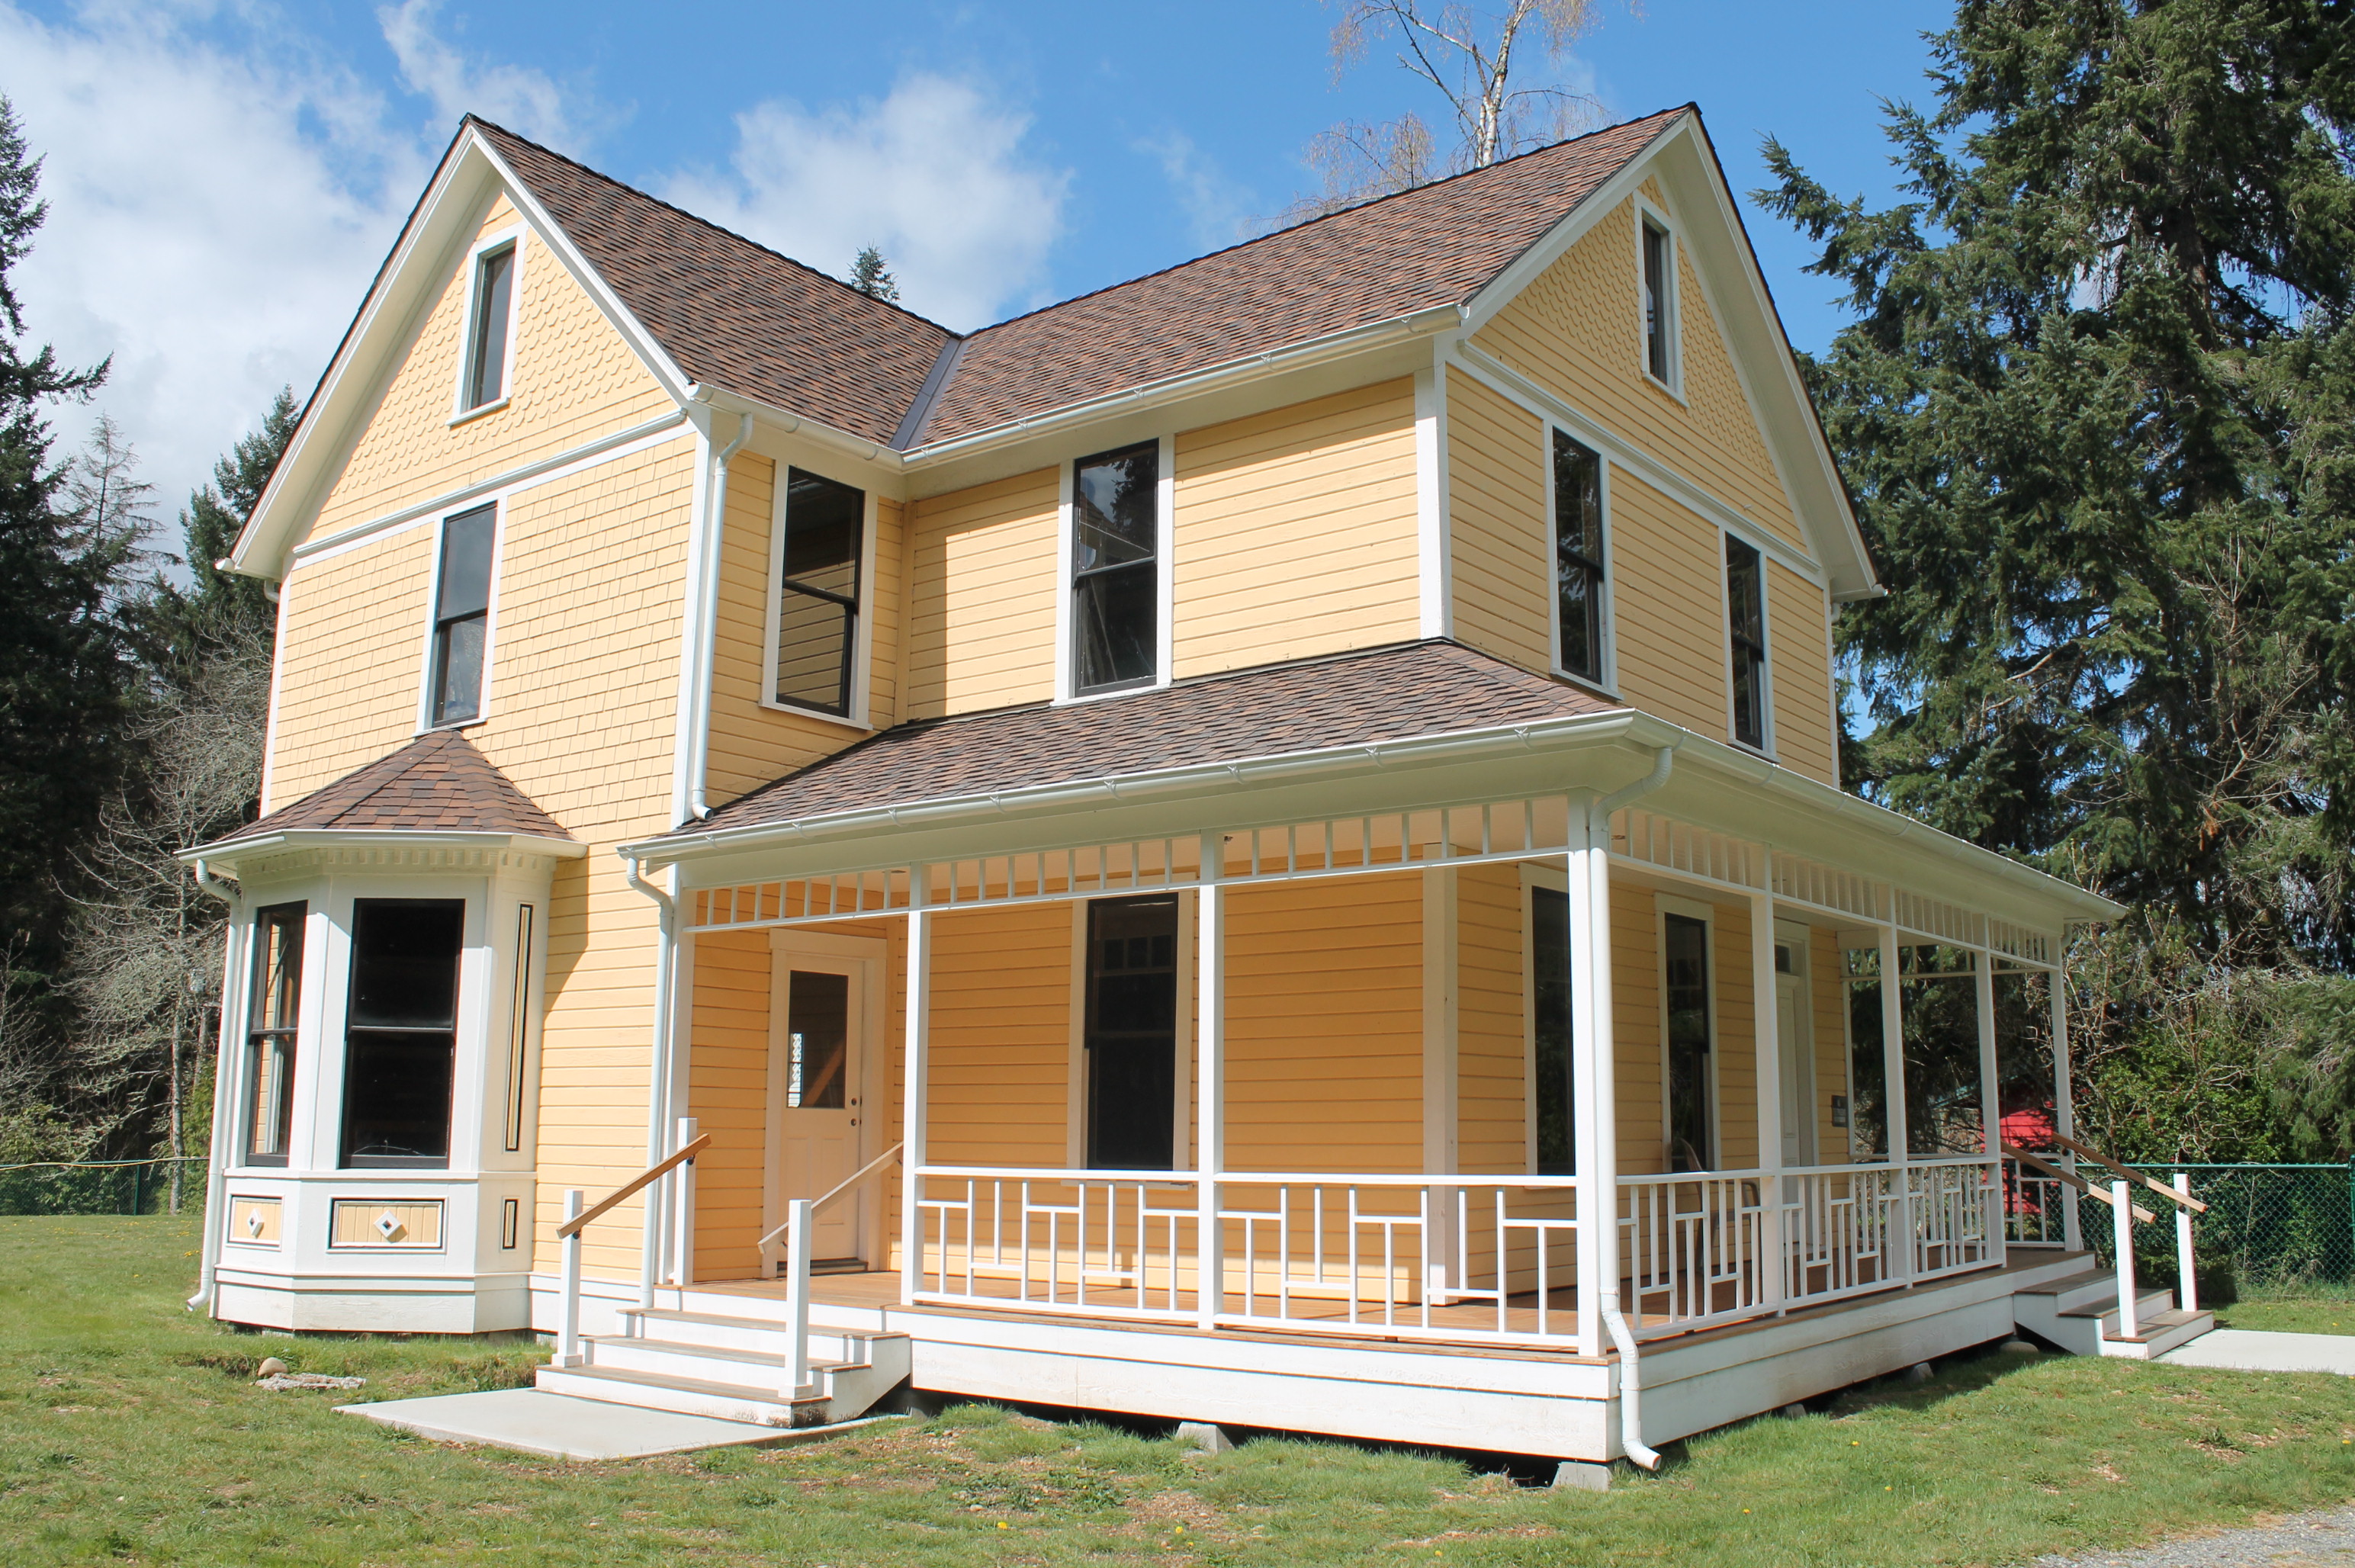 The Reard Freed House exterior after restoration work. It is a yellow 19th century two-story farmhouse with white trim, has a bay window, and a partial wrap-around porch.